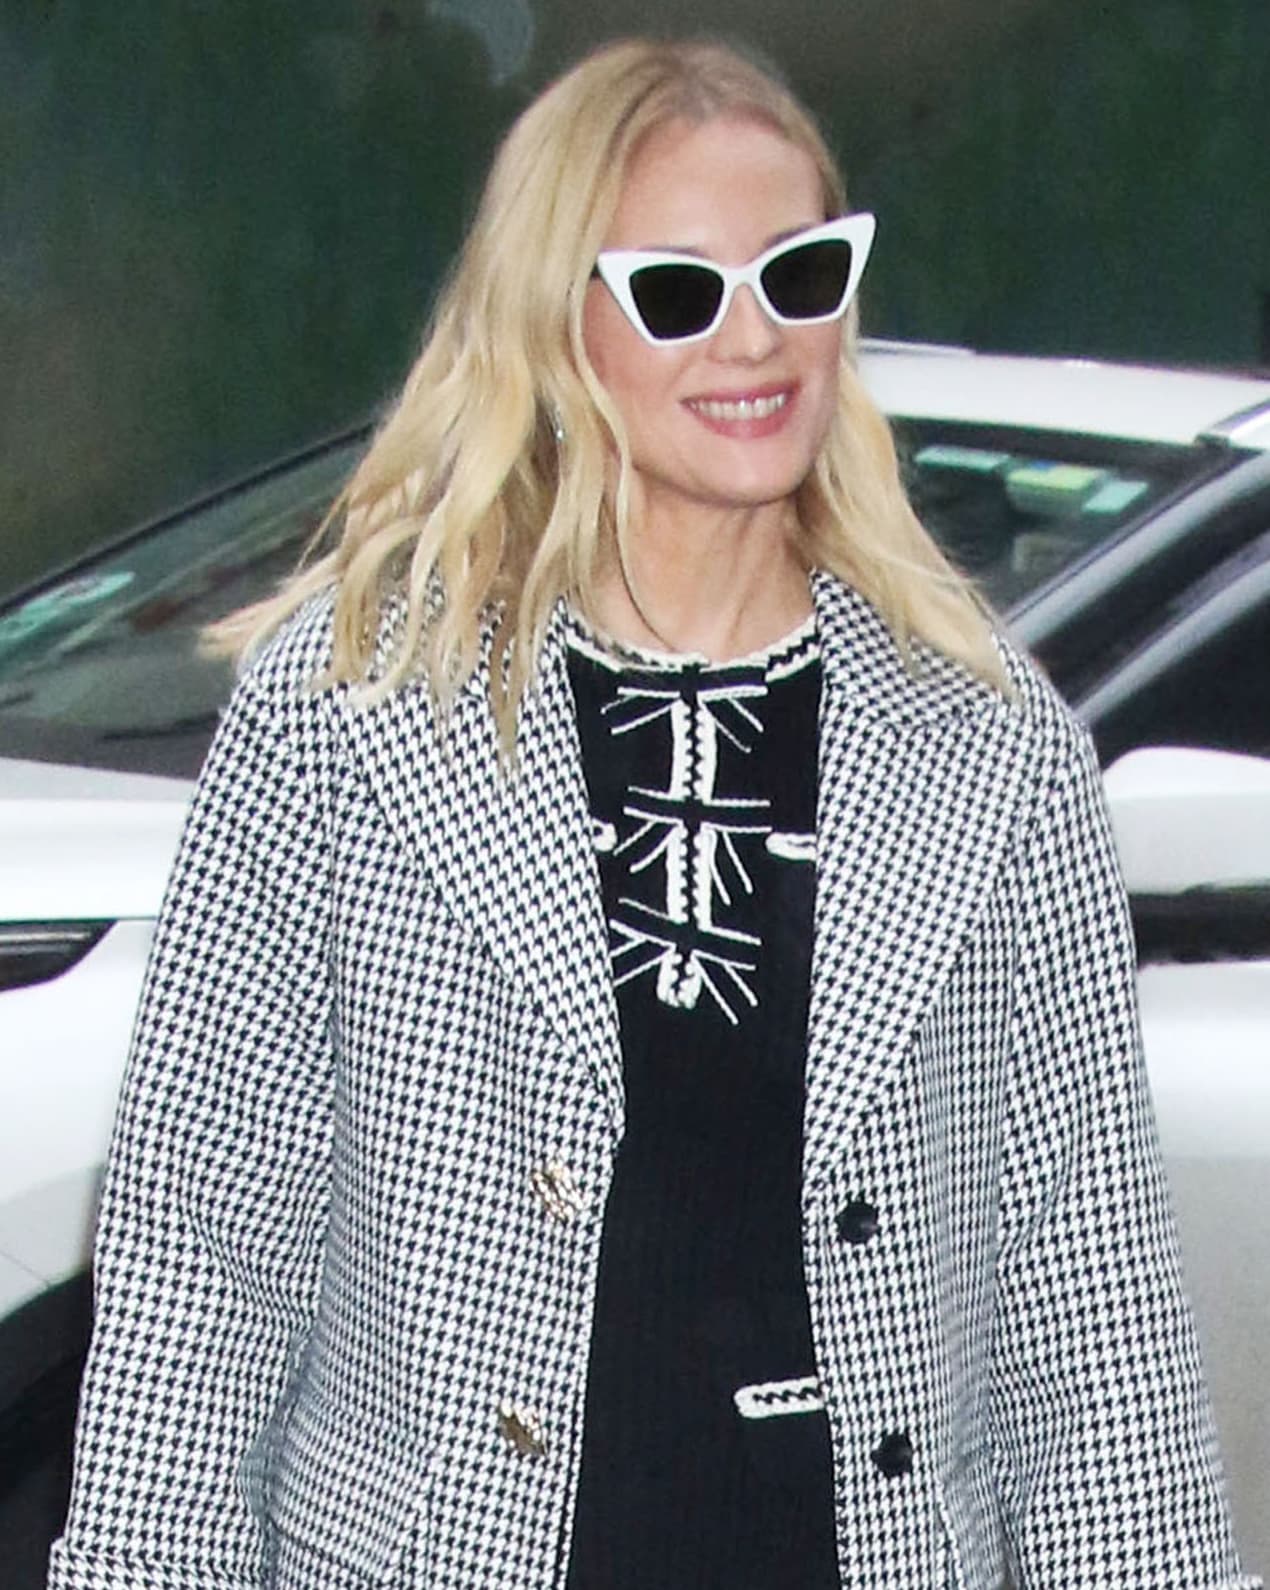 Diane Kruger opts for a retro finish with white cat-eye sunglasses